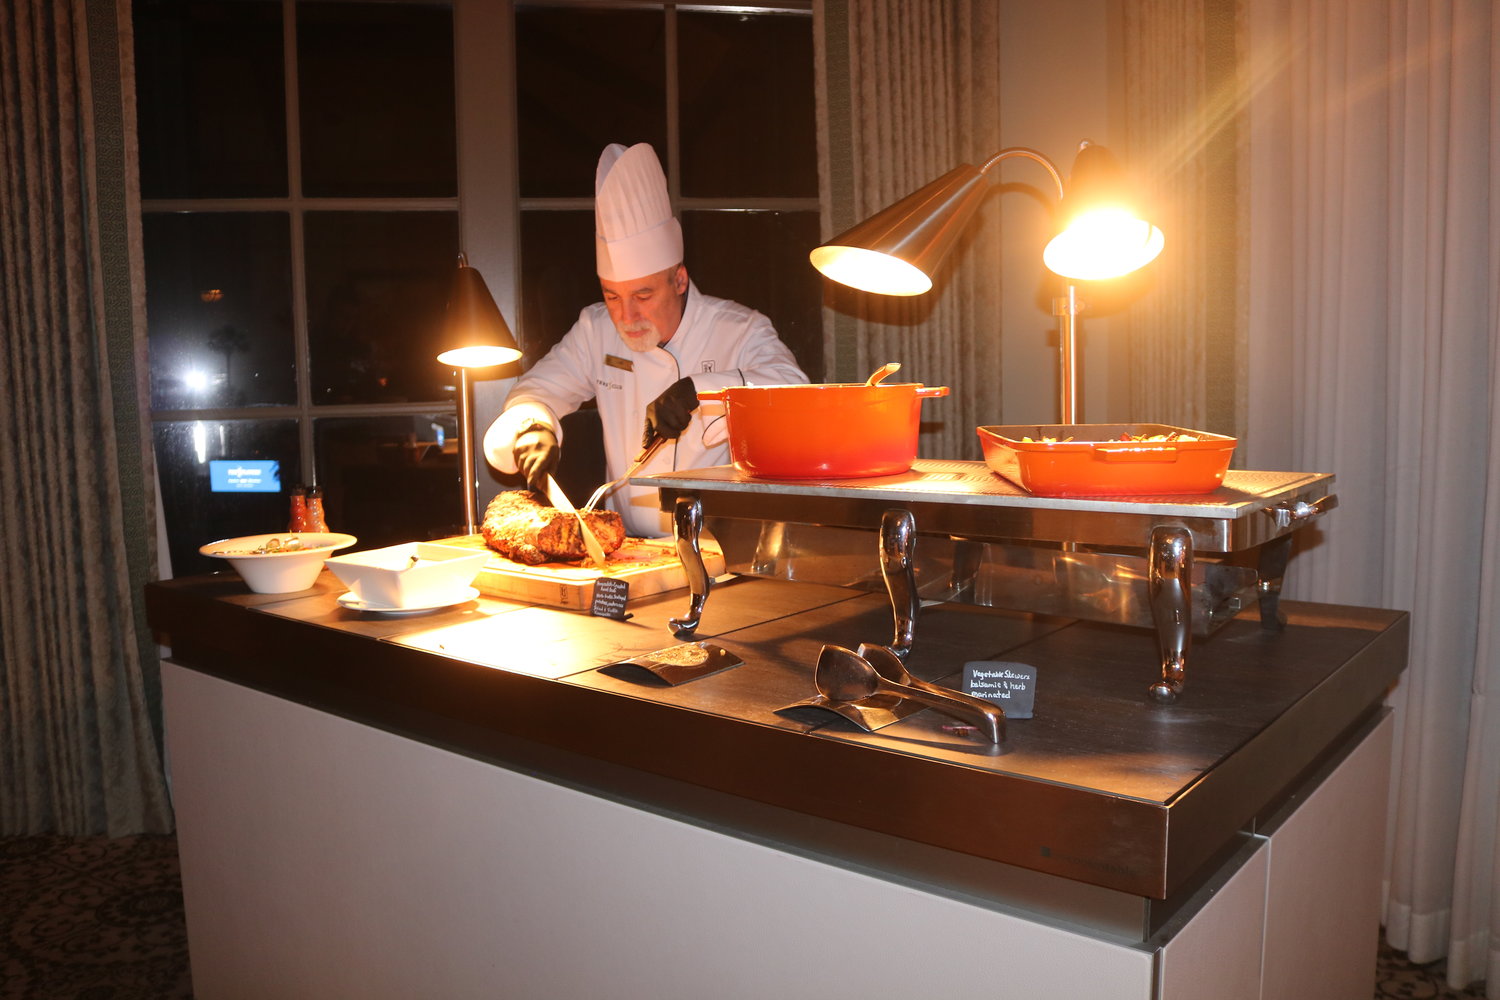 A chef prepares food during the event.